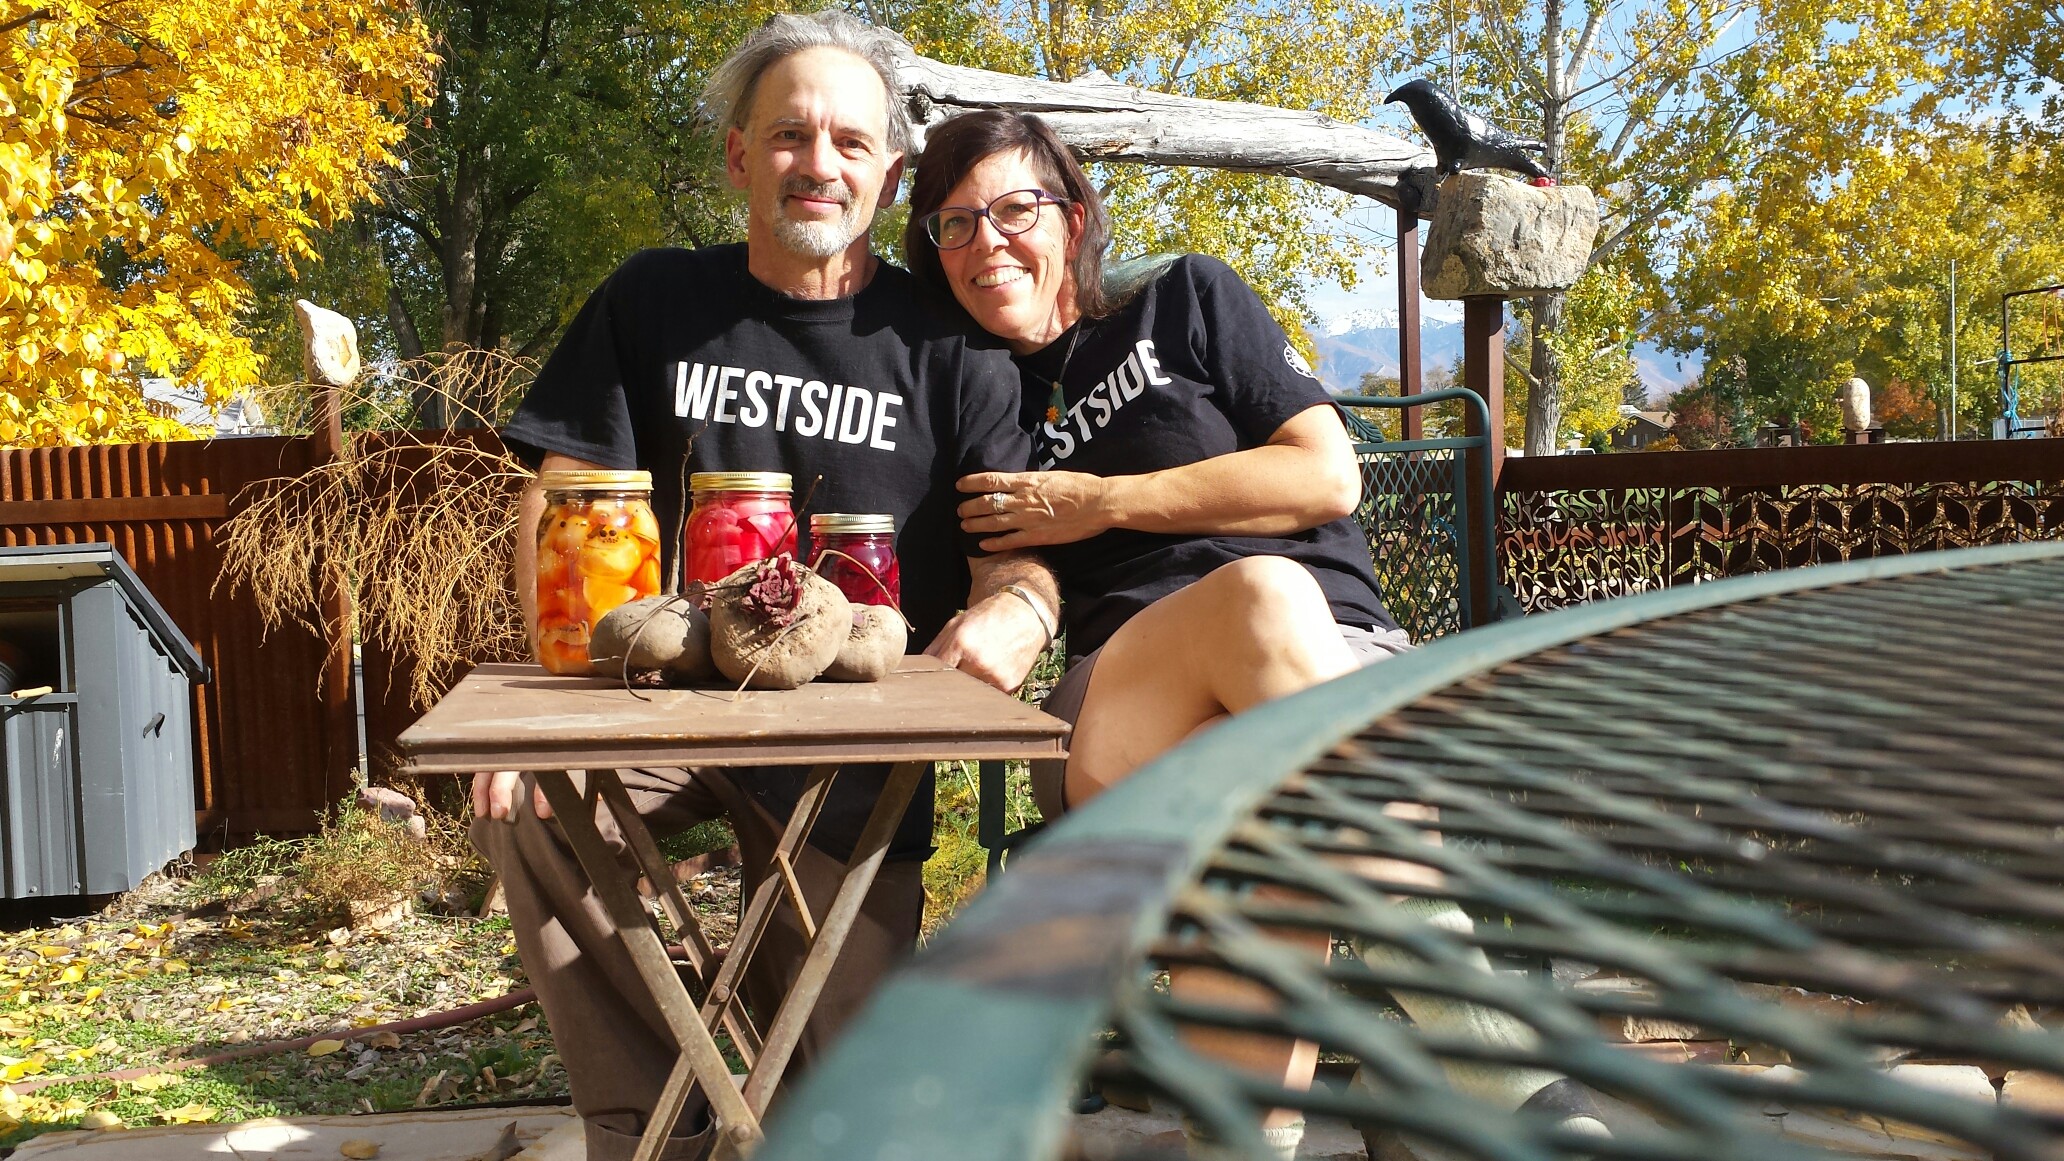 Linda and Mark wear their WESTSIDE shirts with pride